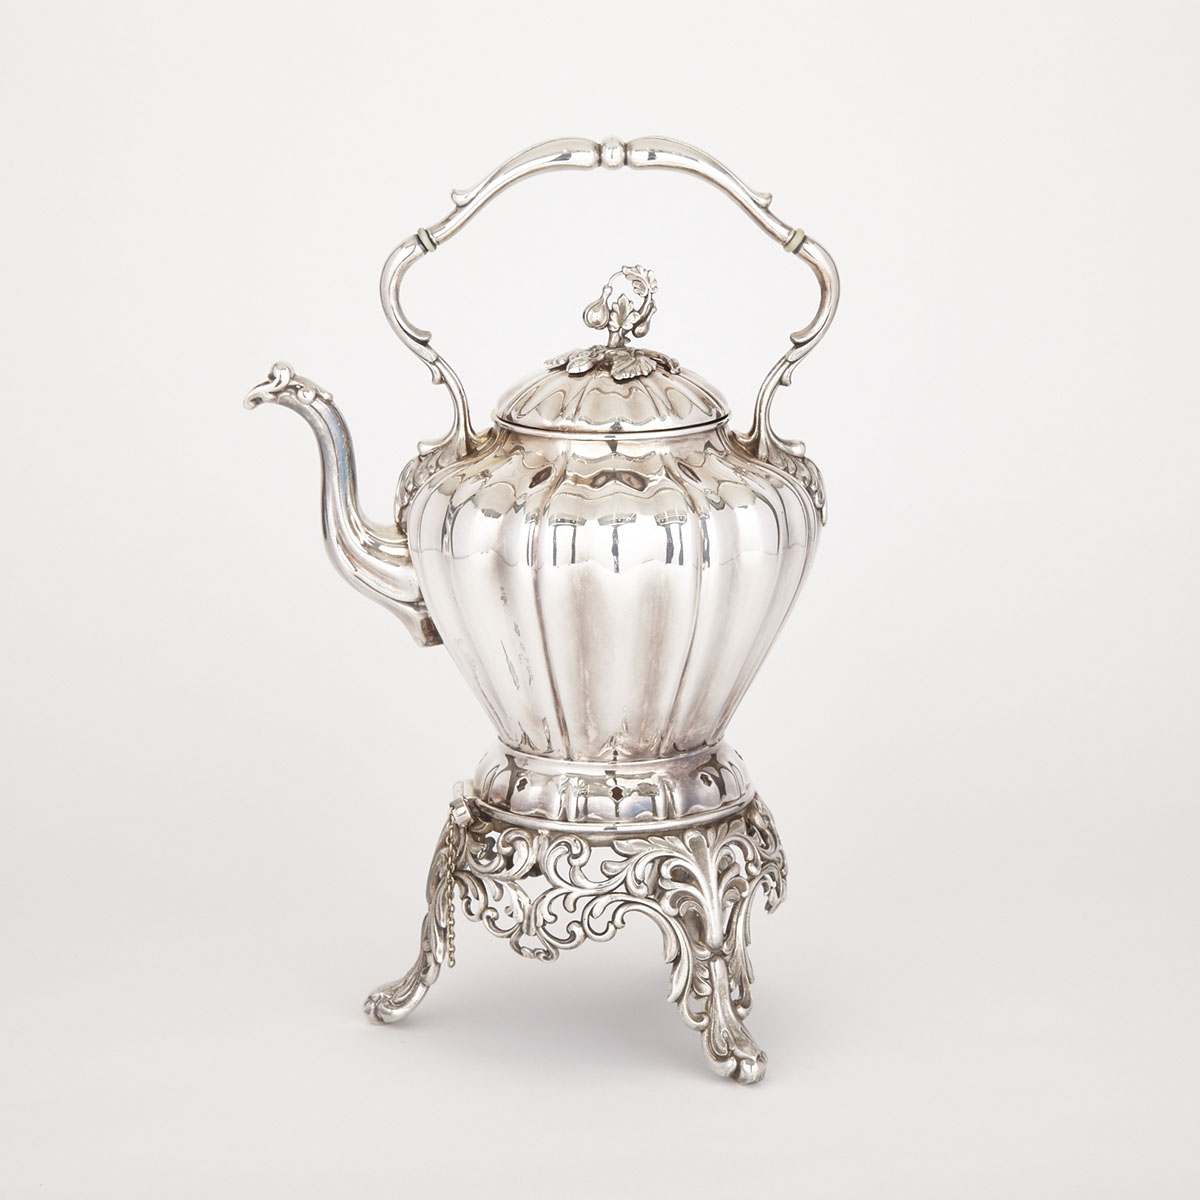 American Silver Plated Kettle on Stand, Reed & Barton, late 19th century